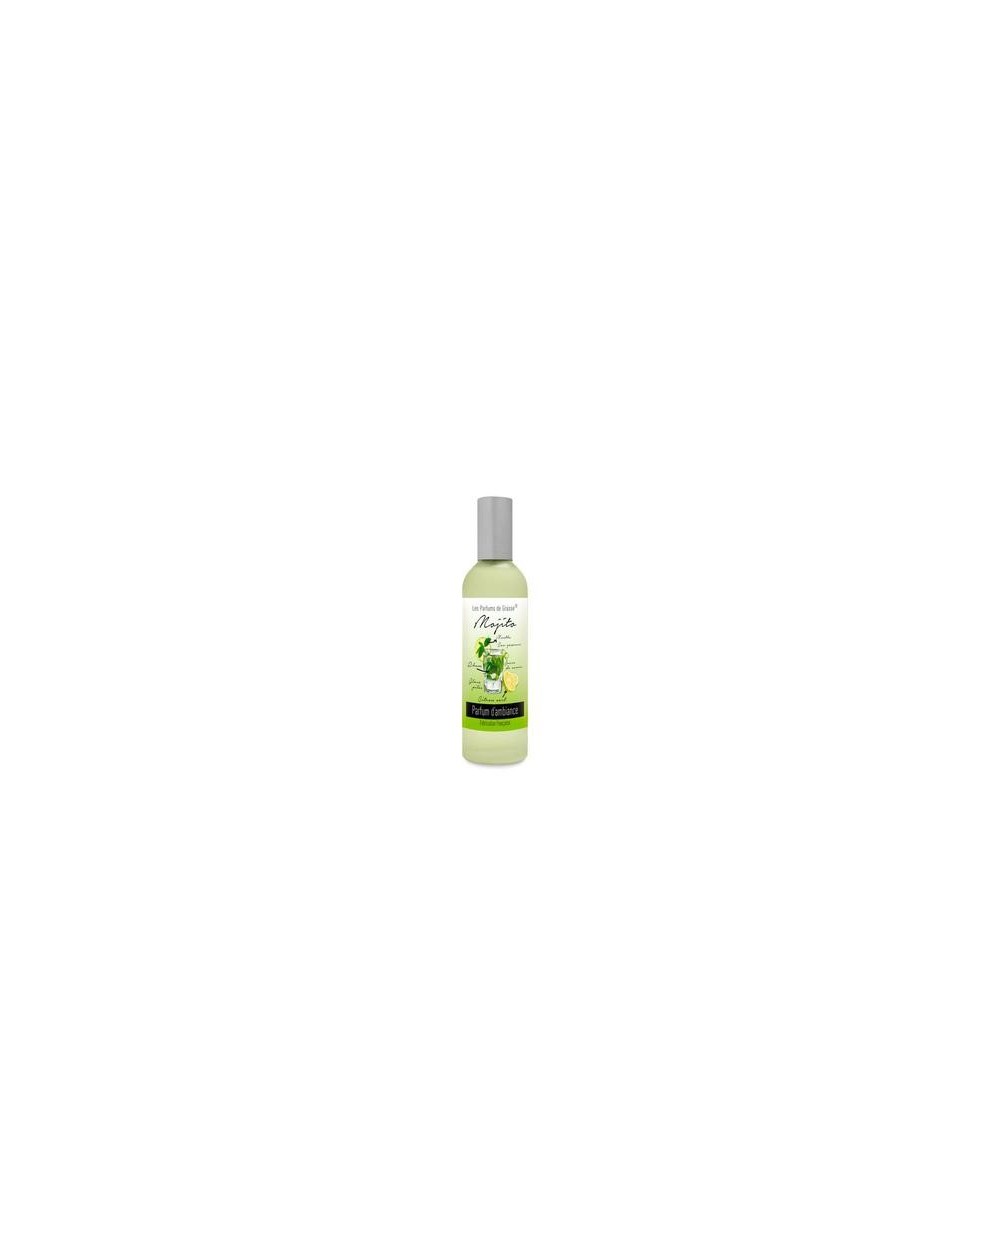 VAPO AMBIANCE COCKTAIL MOJITO 200ML FRAGRANCE STORE